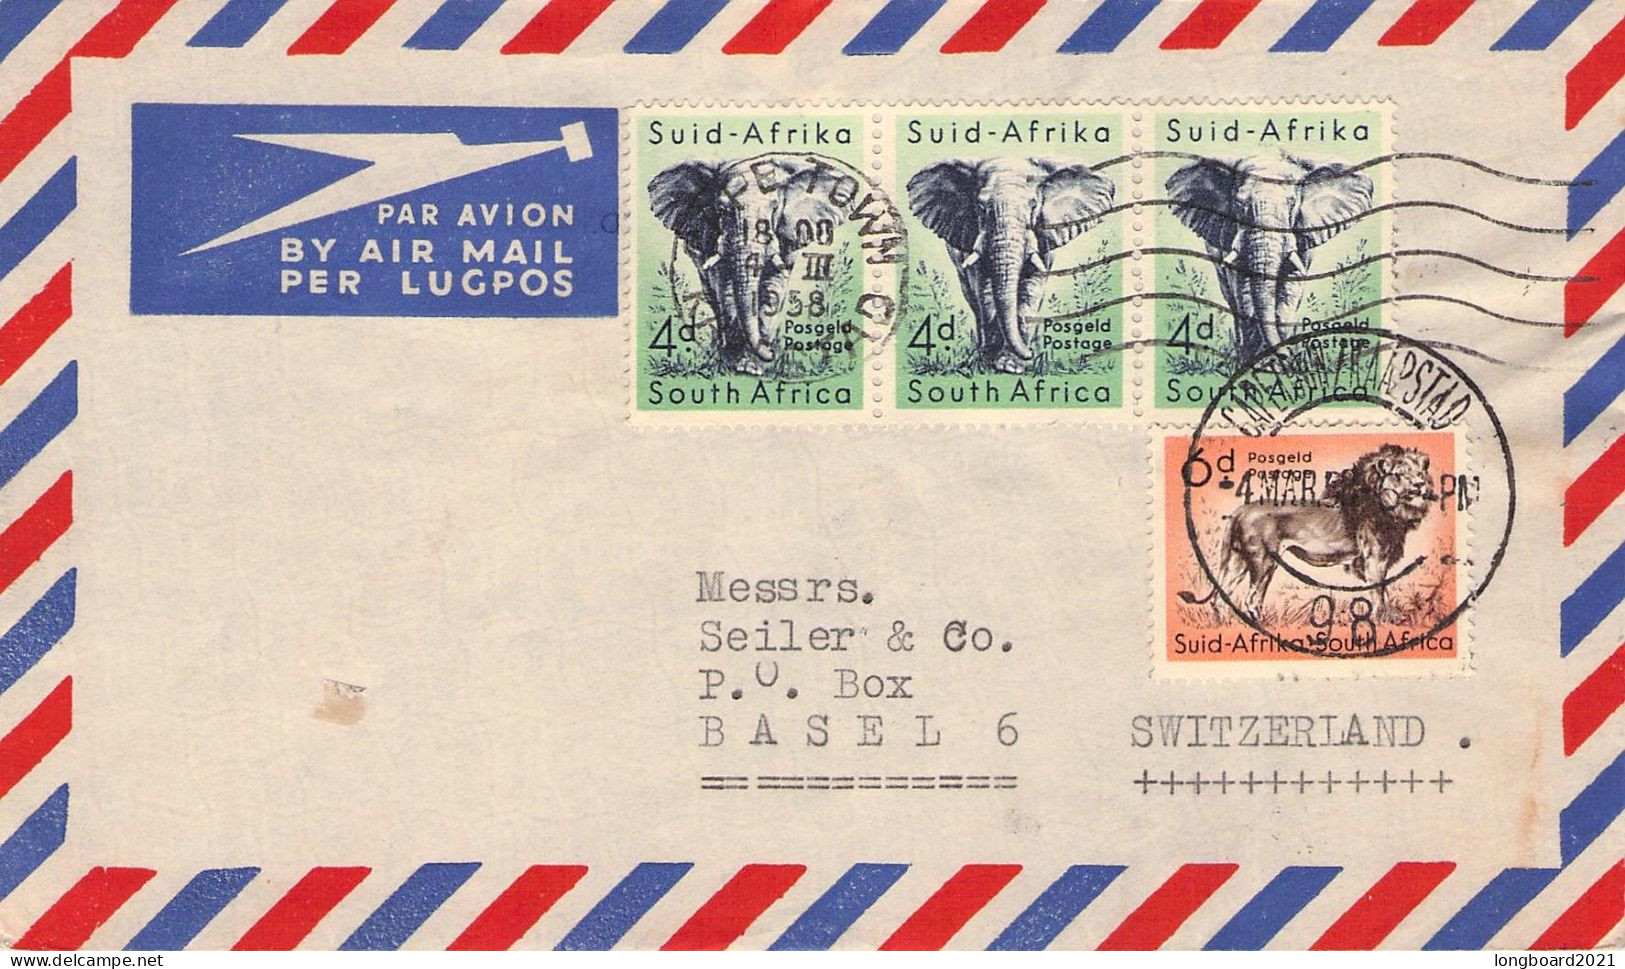 SOUTH AFRICA - MAIL 1958 CAPE TOWN - BASEL/CH / 5246 - Aéreo